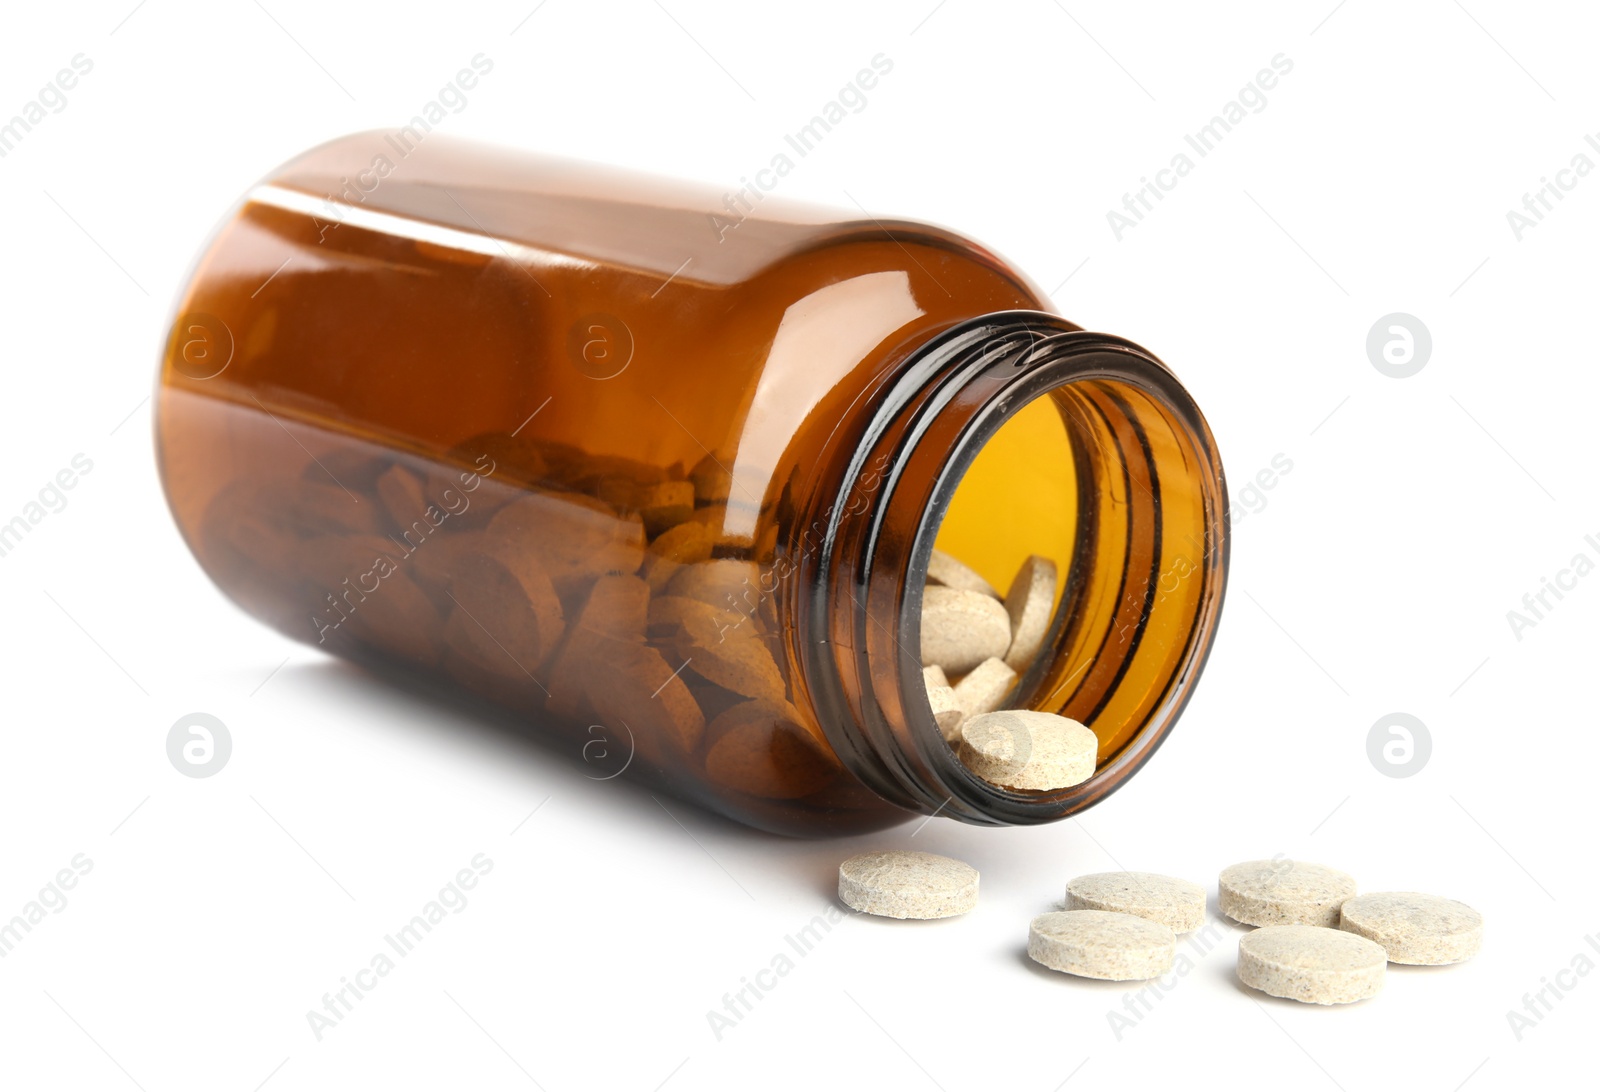 Photo of Bottle with vitamin pills isolated on white